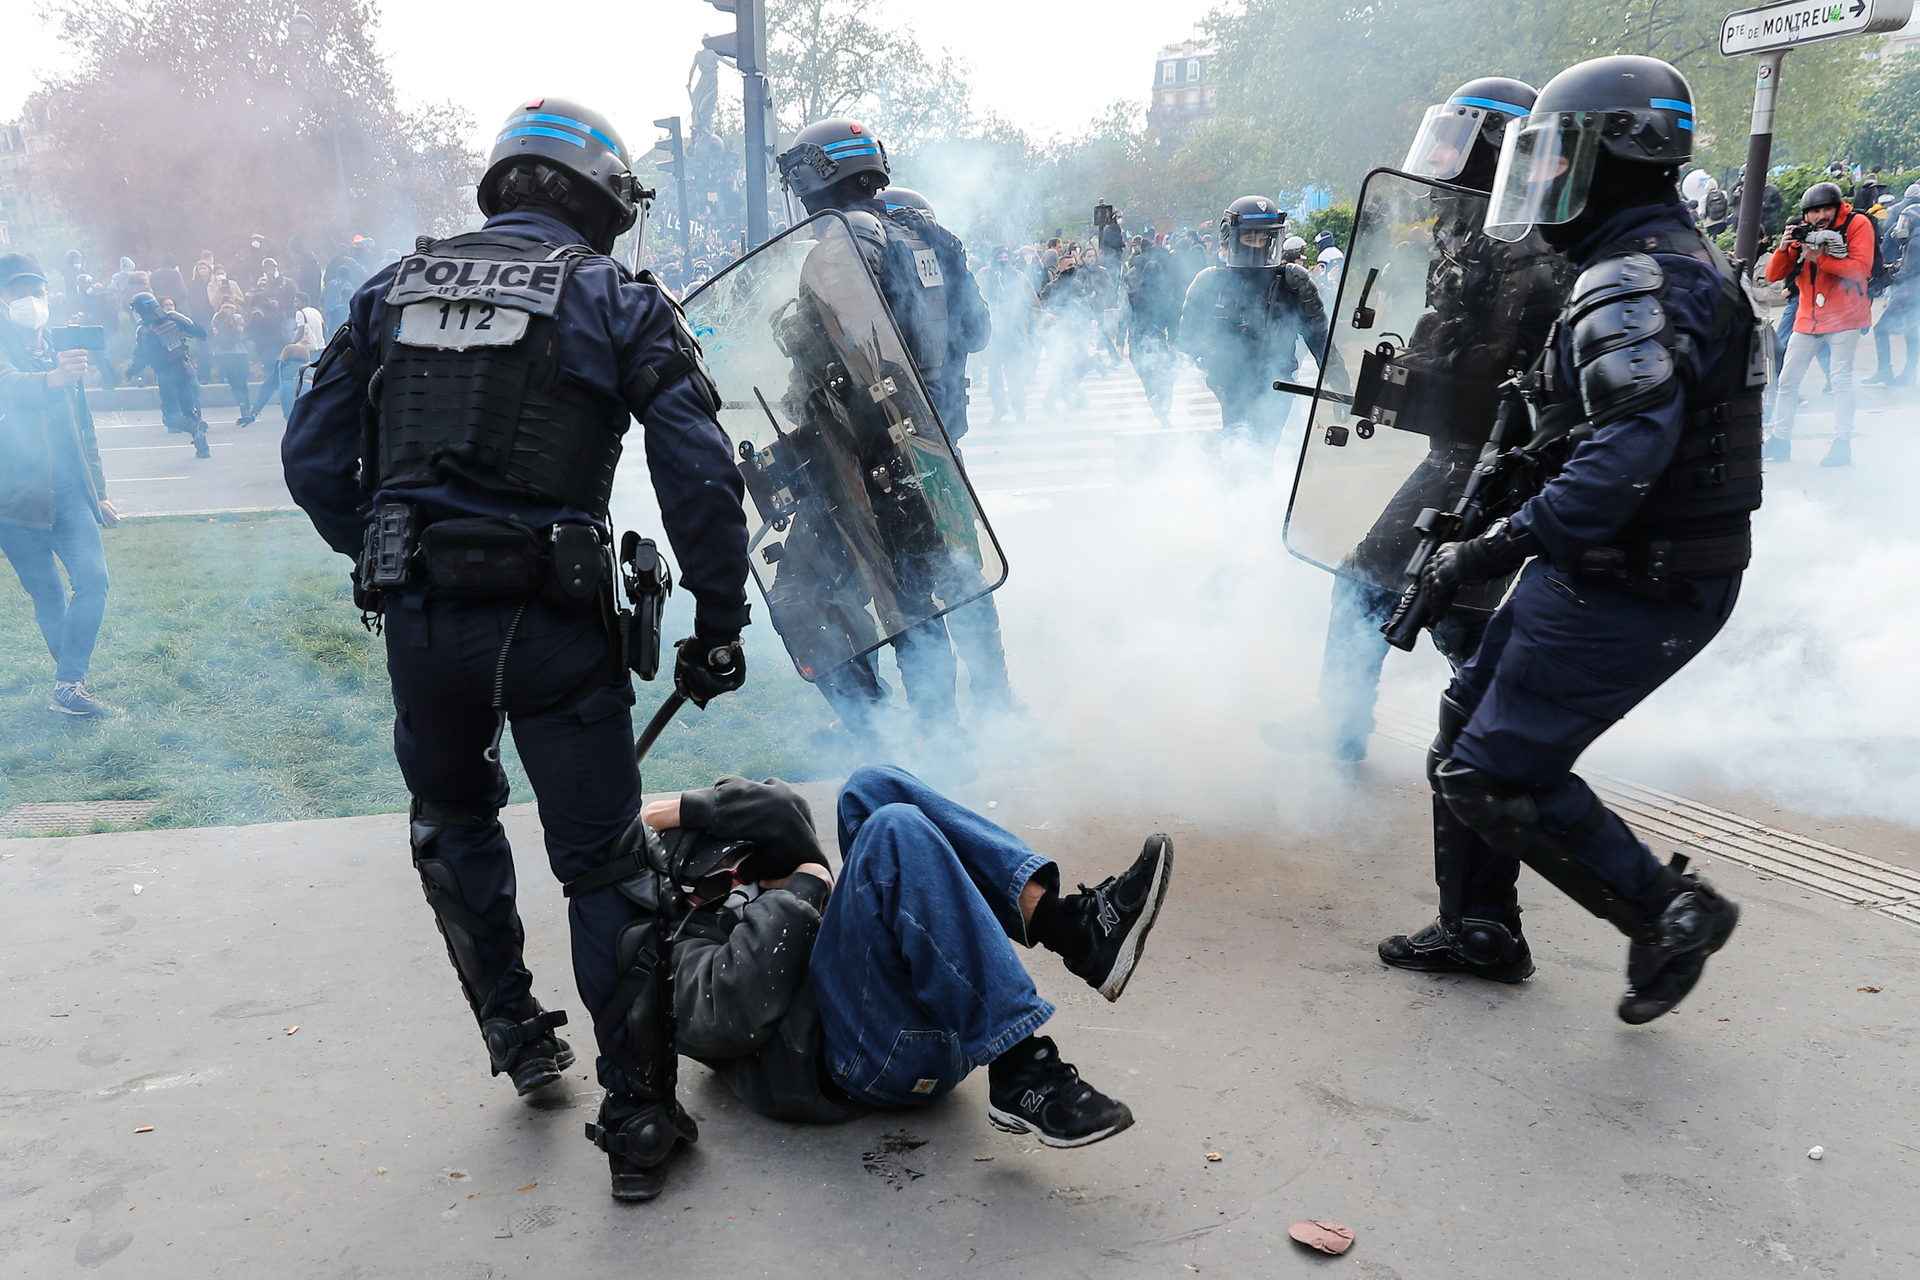 More than 100 policemen are injured during the demonstrations on May 1 in France